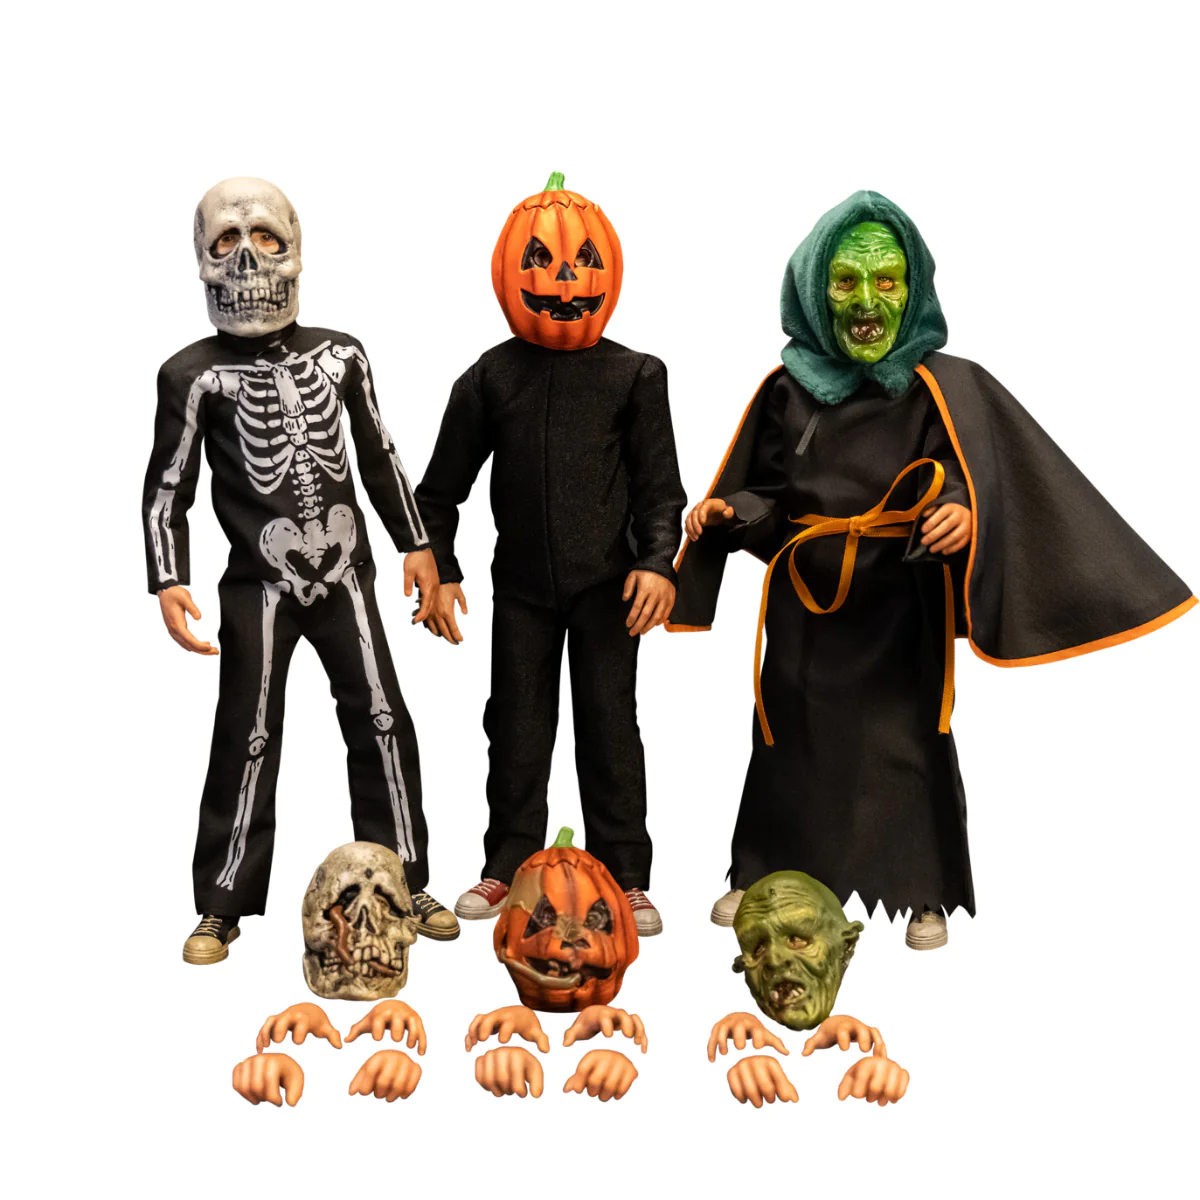 Halloween III Season of the Witch 1:6 Scale Trick or Treater Action Figure Set 12" Premium Figures